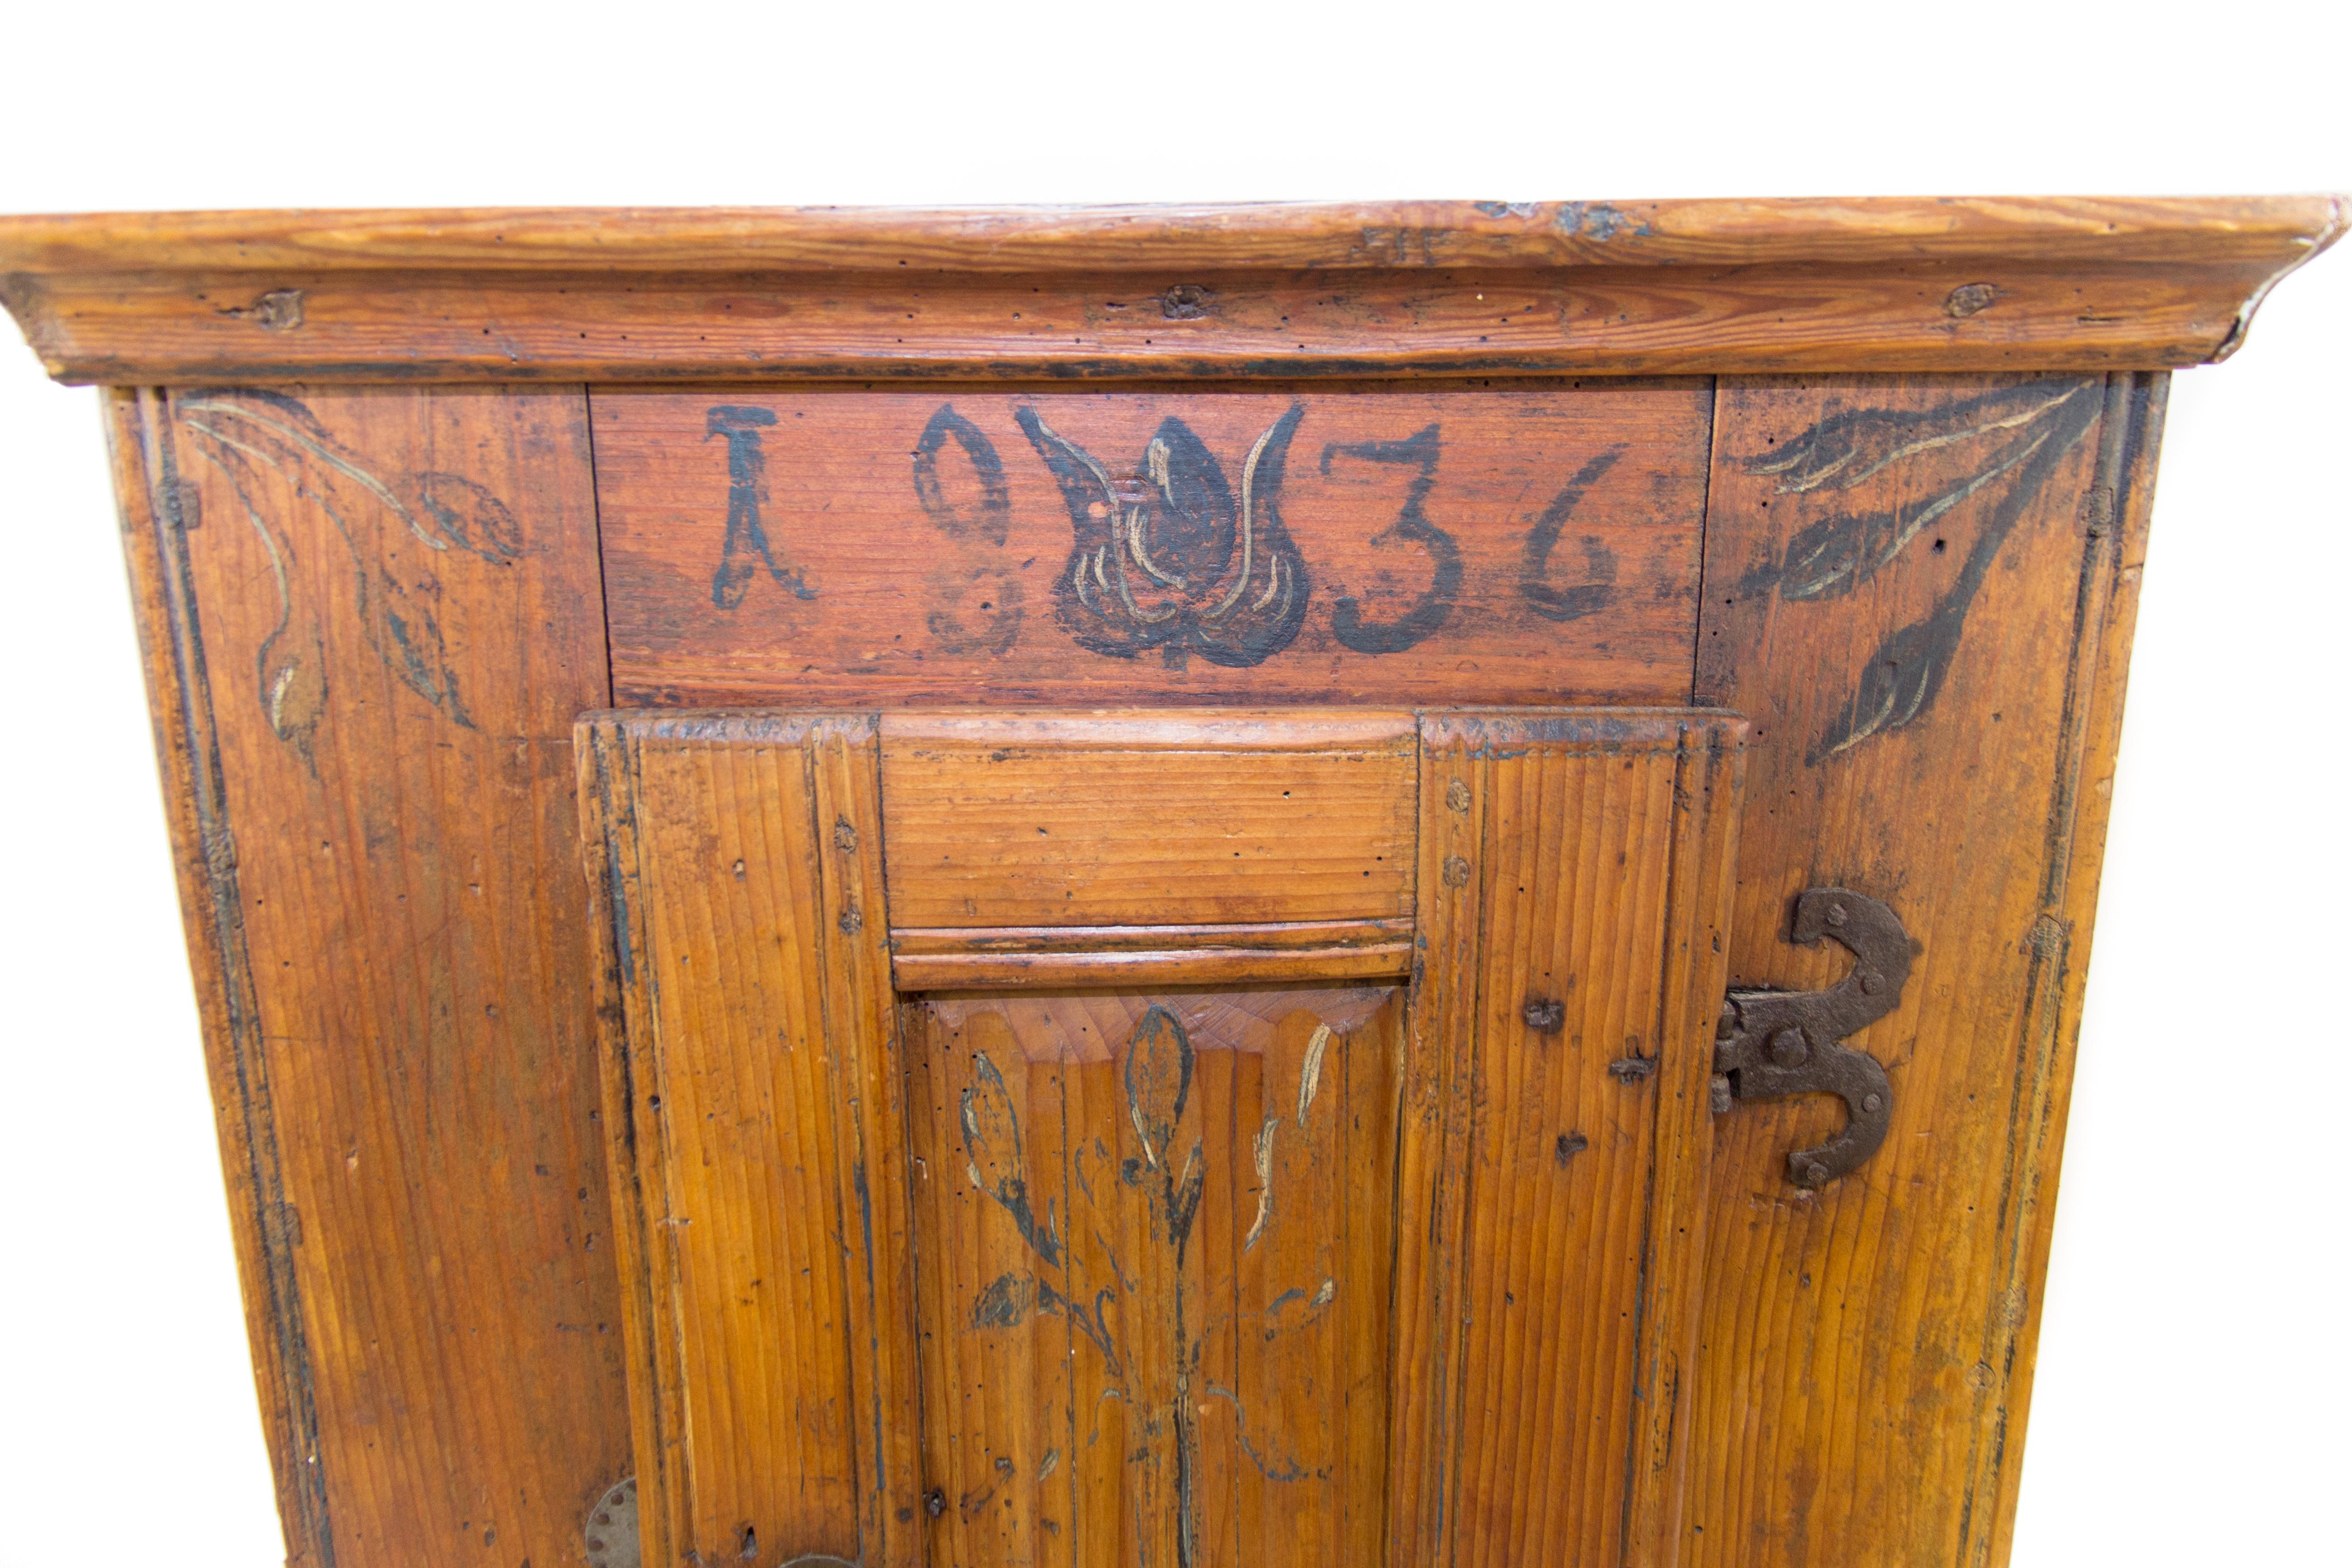 Early 19th century country style Baltic pine cabinet, original hand painted decors and dated with 1836. This antique cabinet is fully functional. It shows signs of age - light scratches and wear from previous use but remains in a good condition.